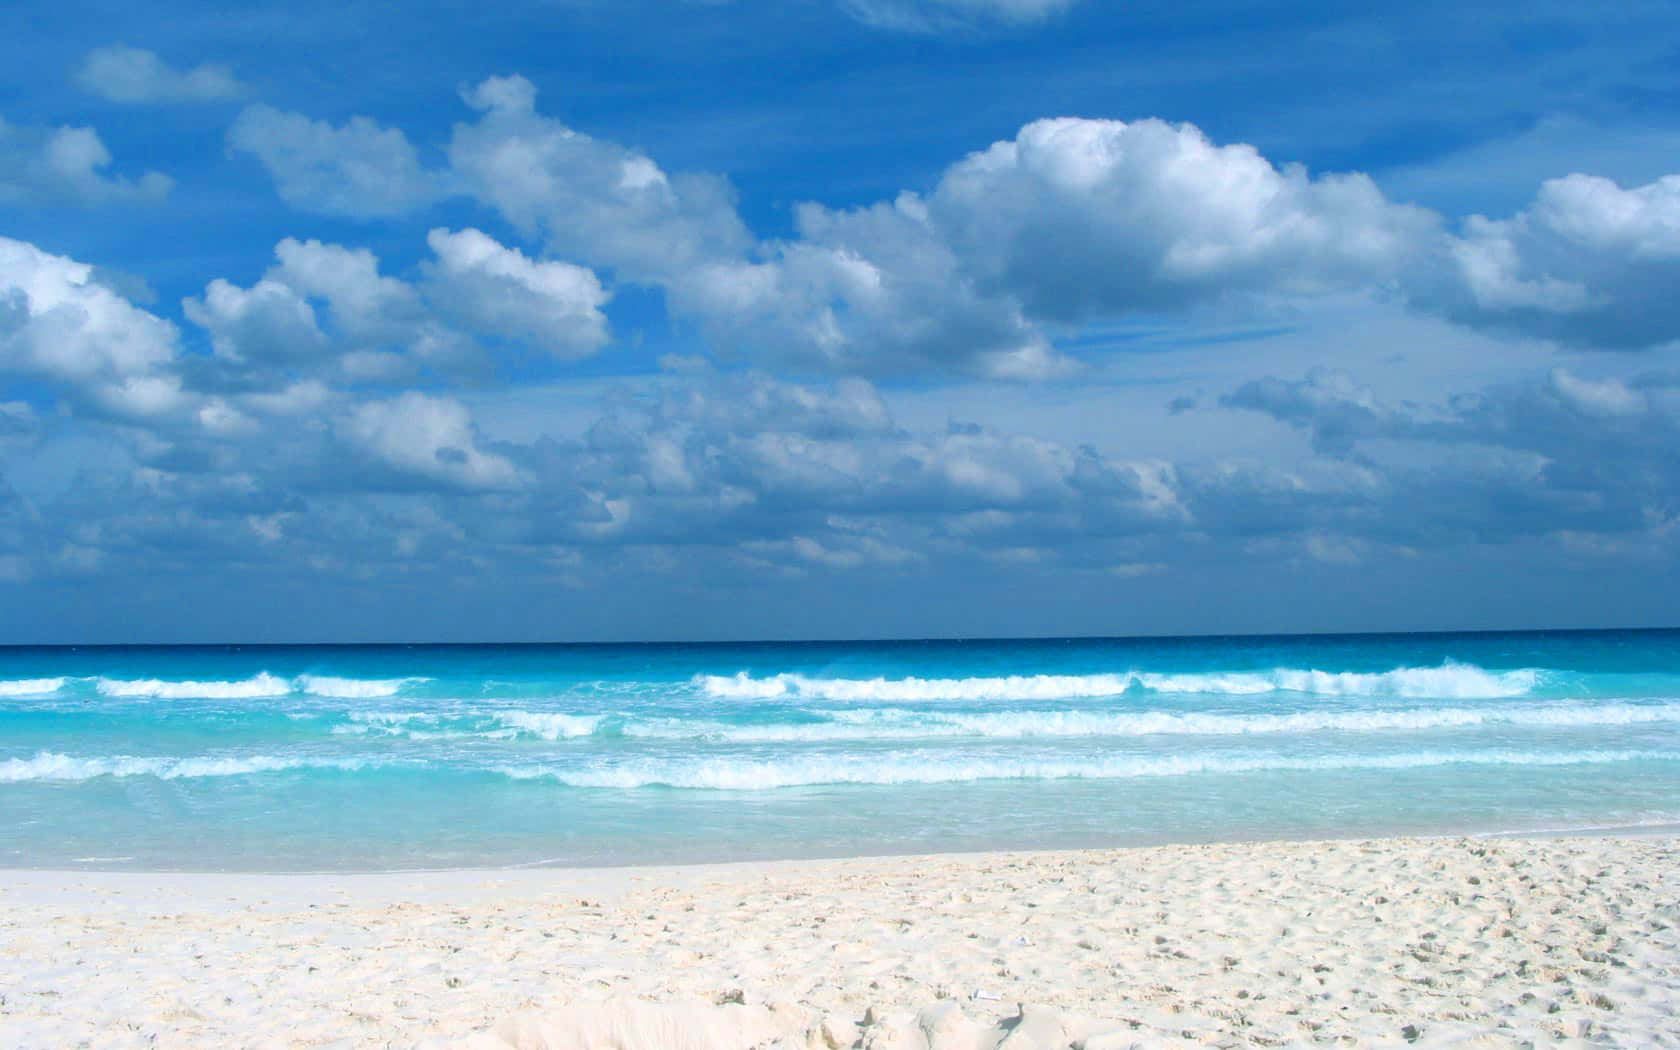 Relax and Unwind on this Caribbean Beach Wallpaper